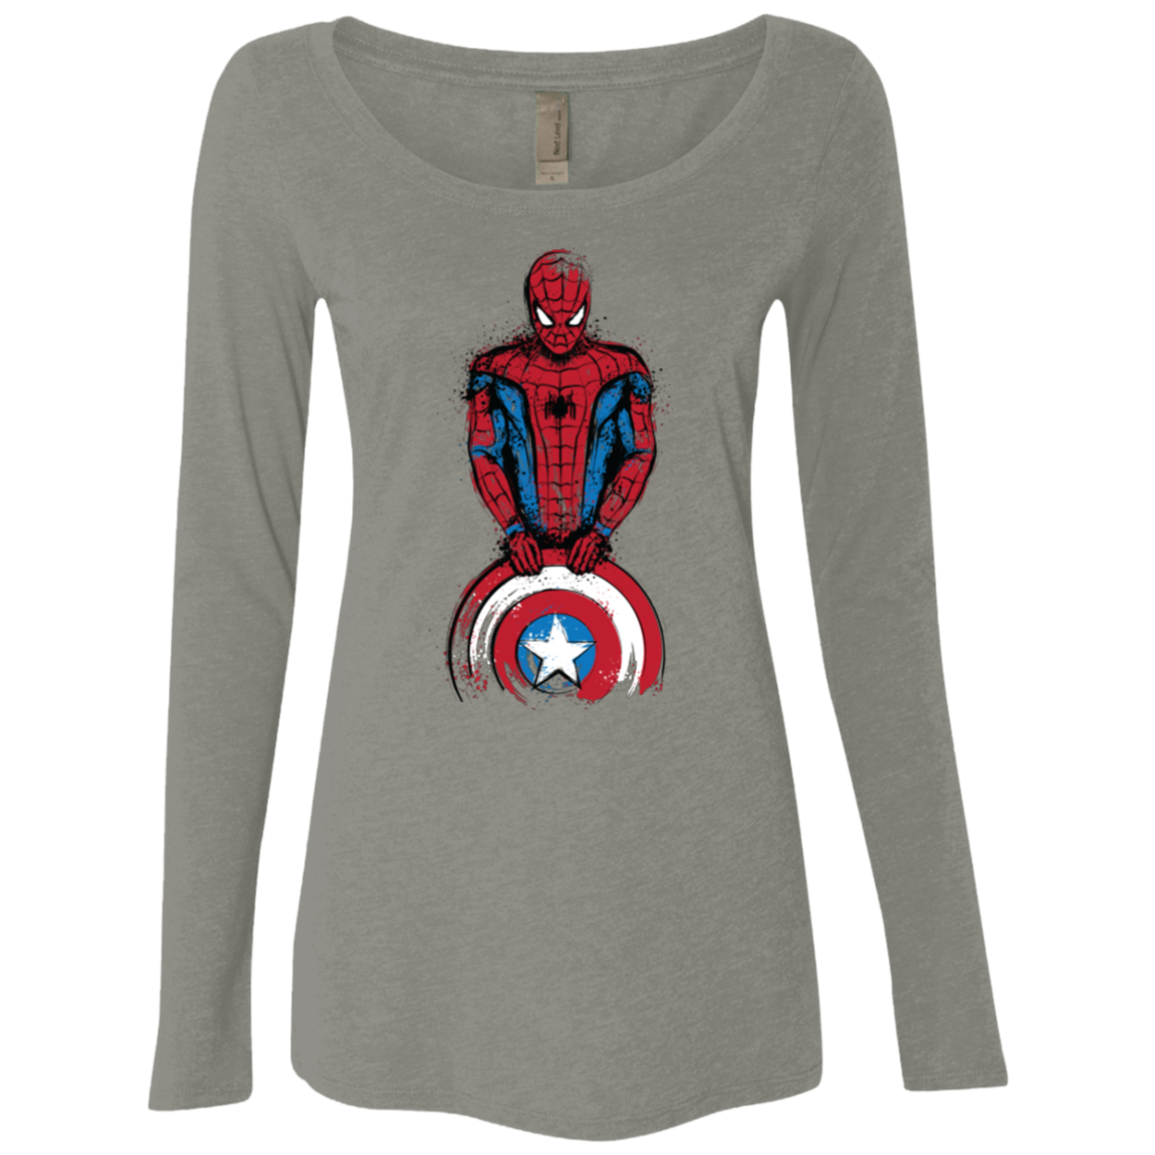 The Spider is Coming Women's Triblend Long Sleeve Shirt